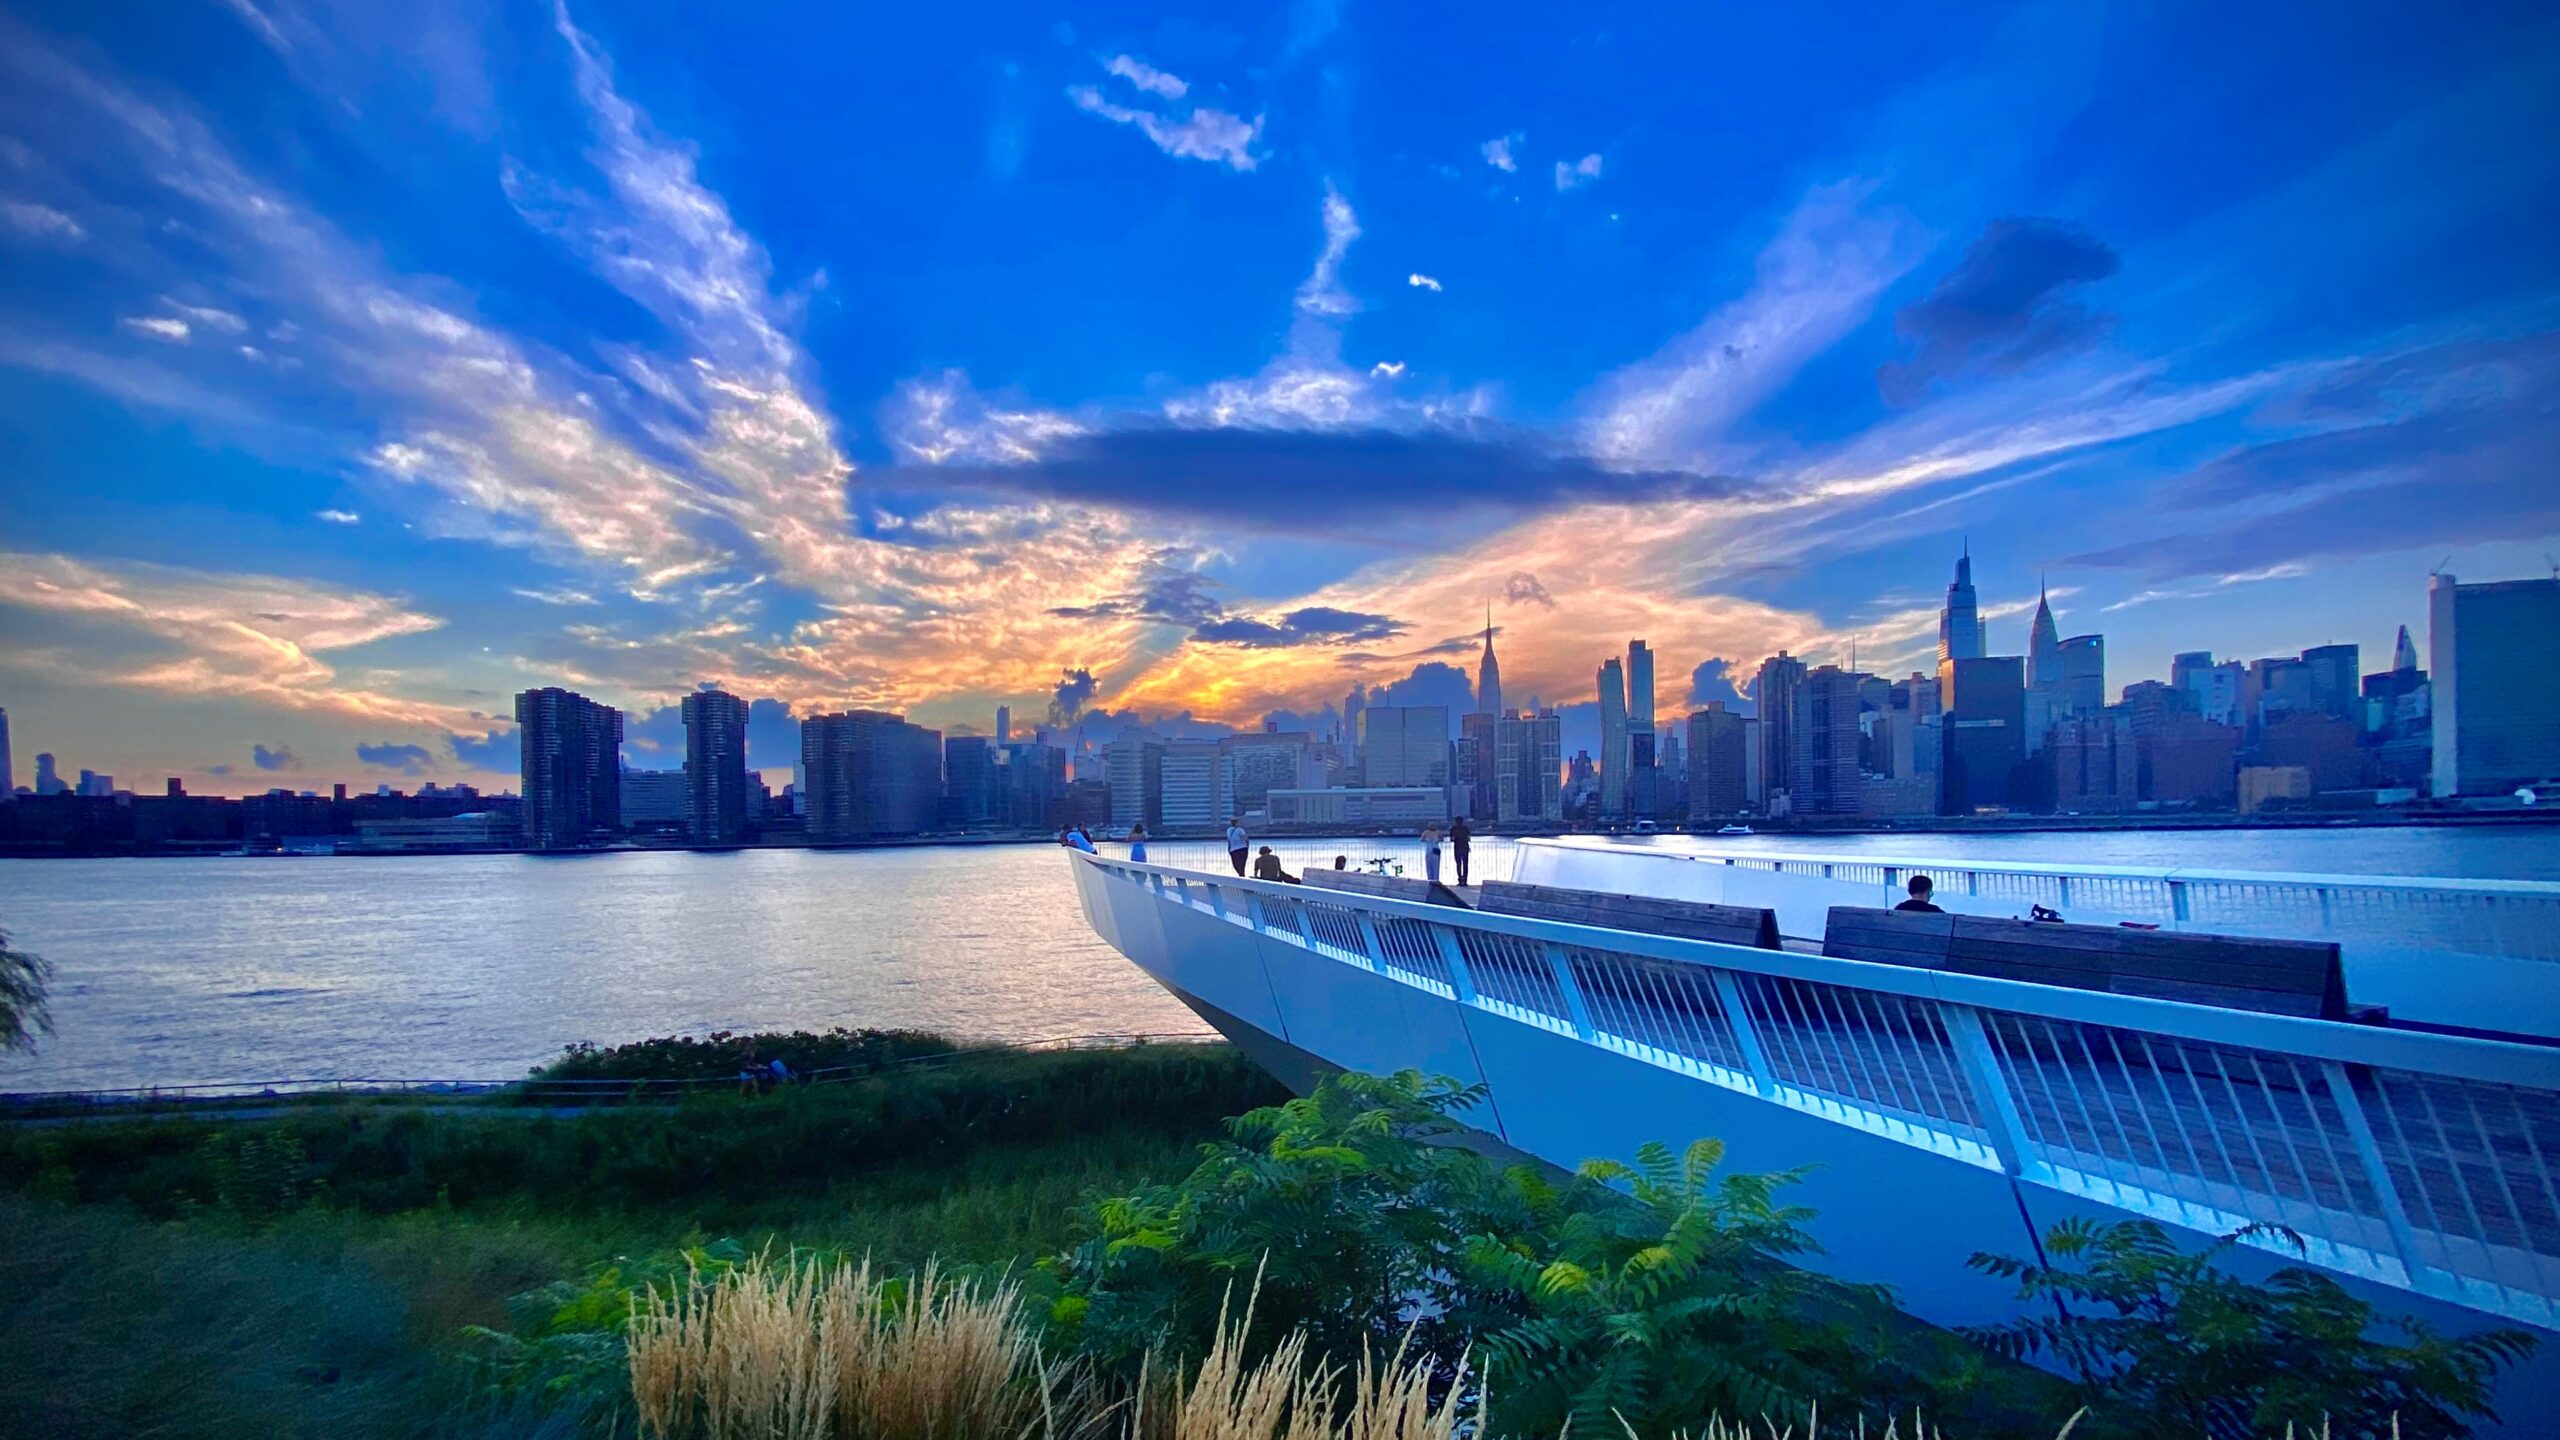 A vivid blue scene of a city skyline viewed from an overlook along a waterfront